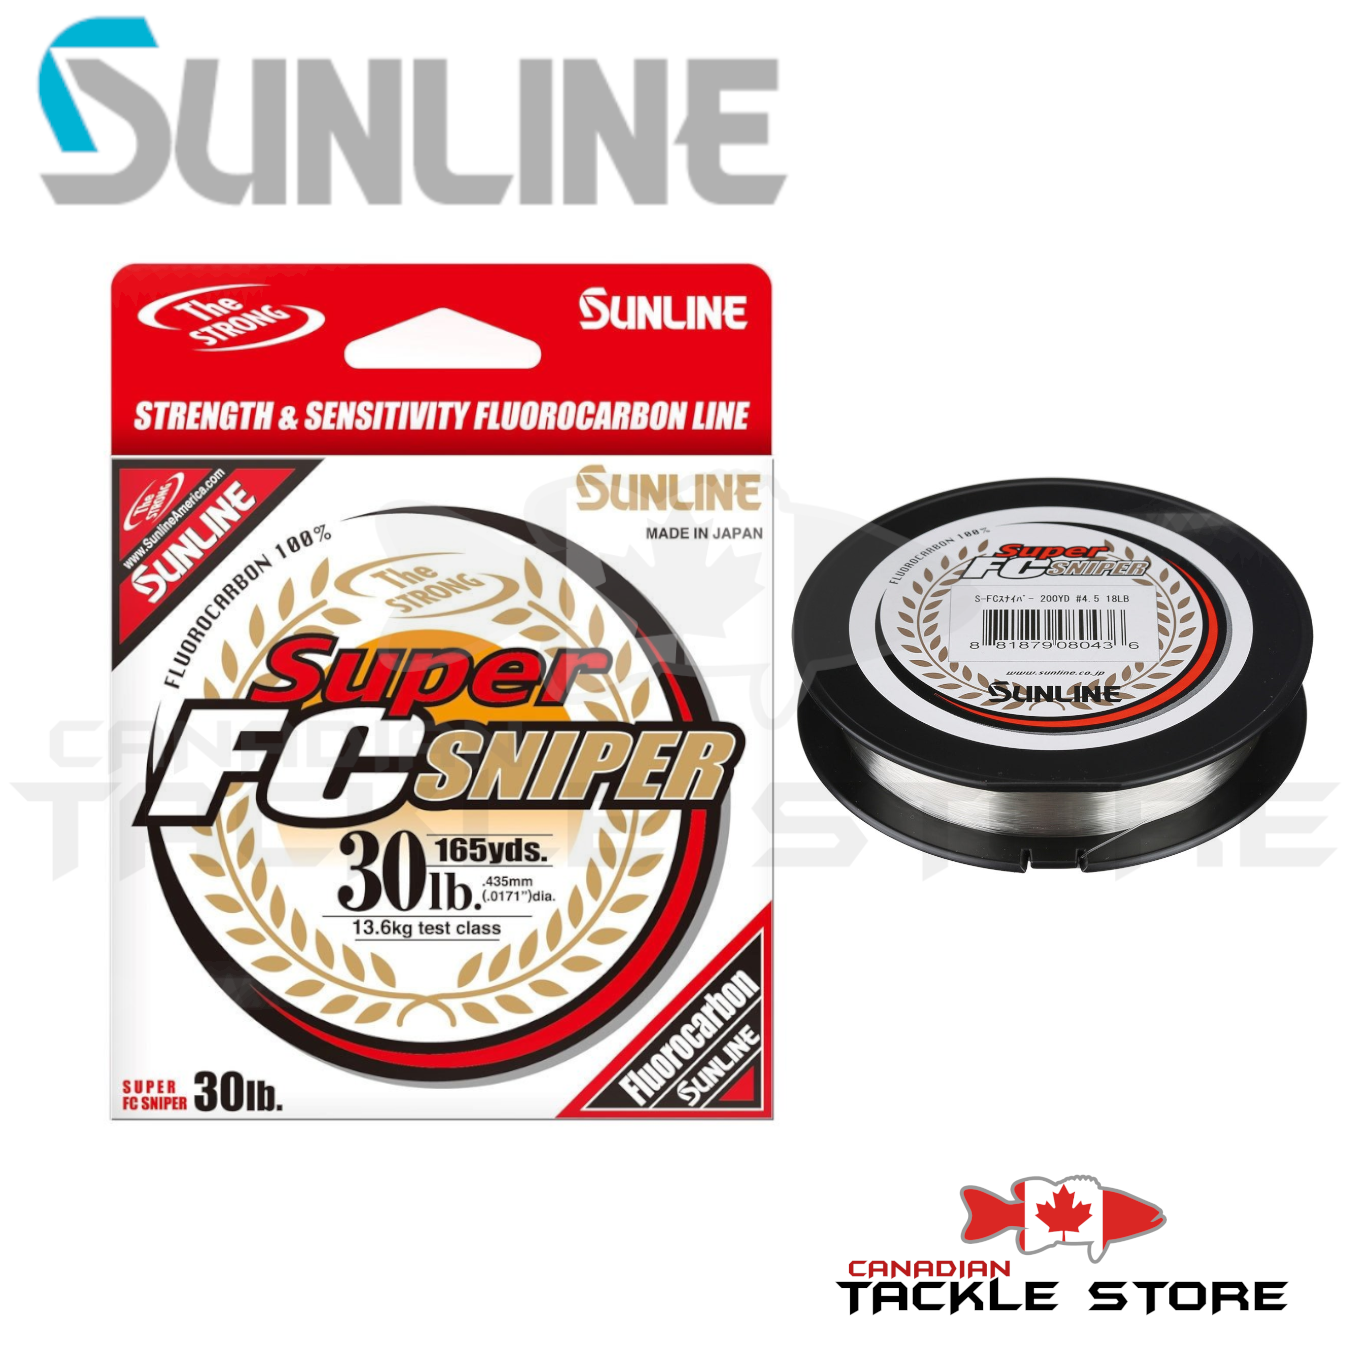 Sufix 832 Advanced Superline Braid 150 yards CLEARANCE — Bait Master Fishing  and Tackle